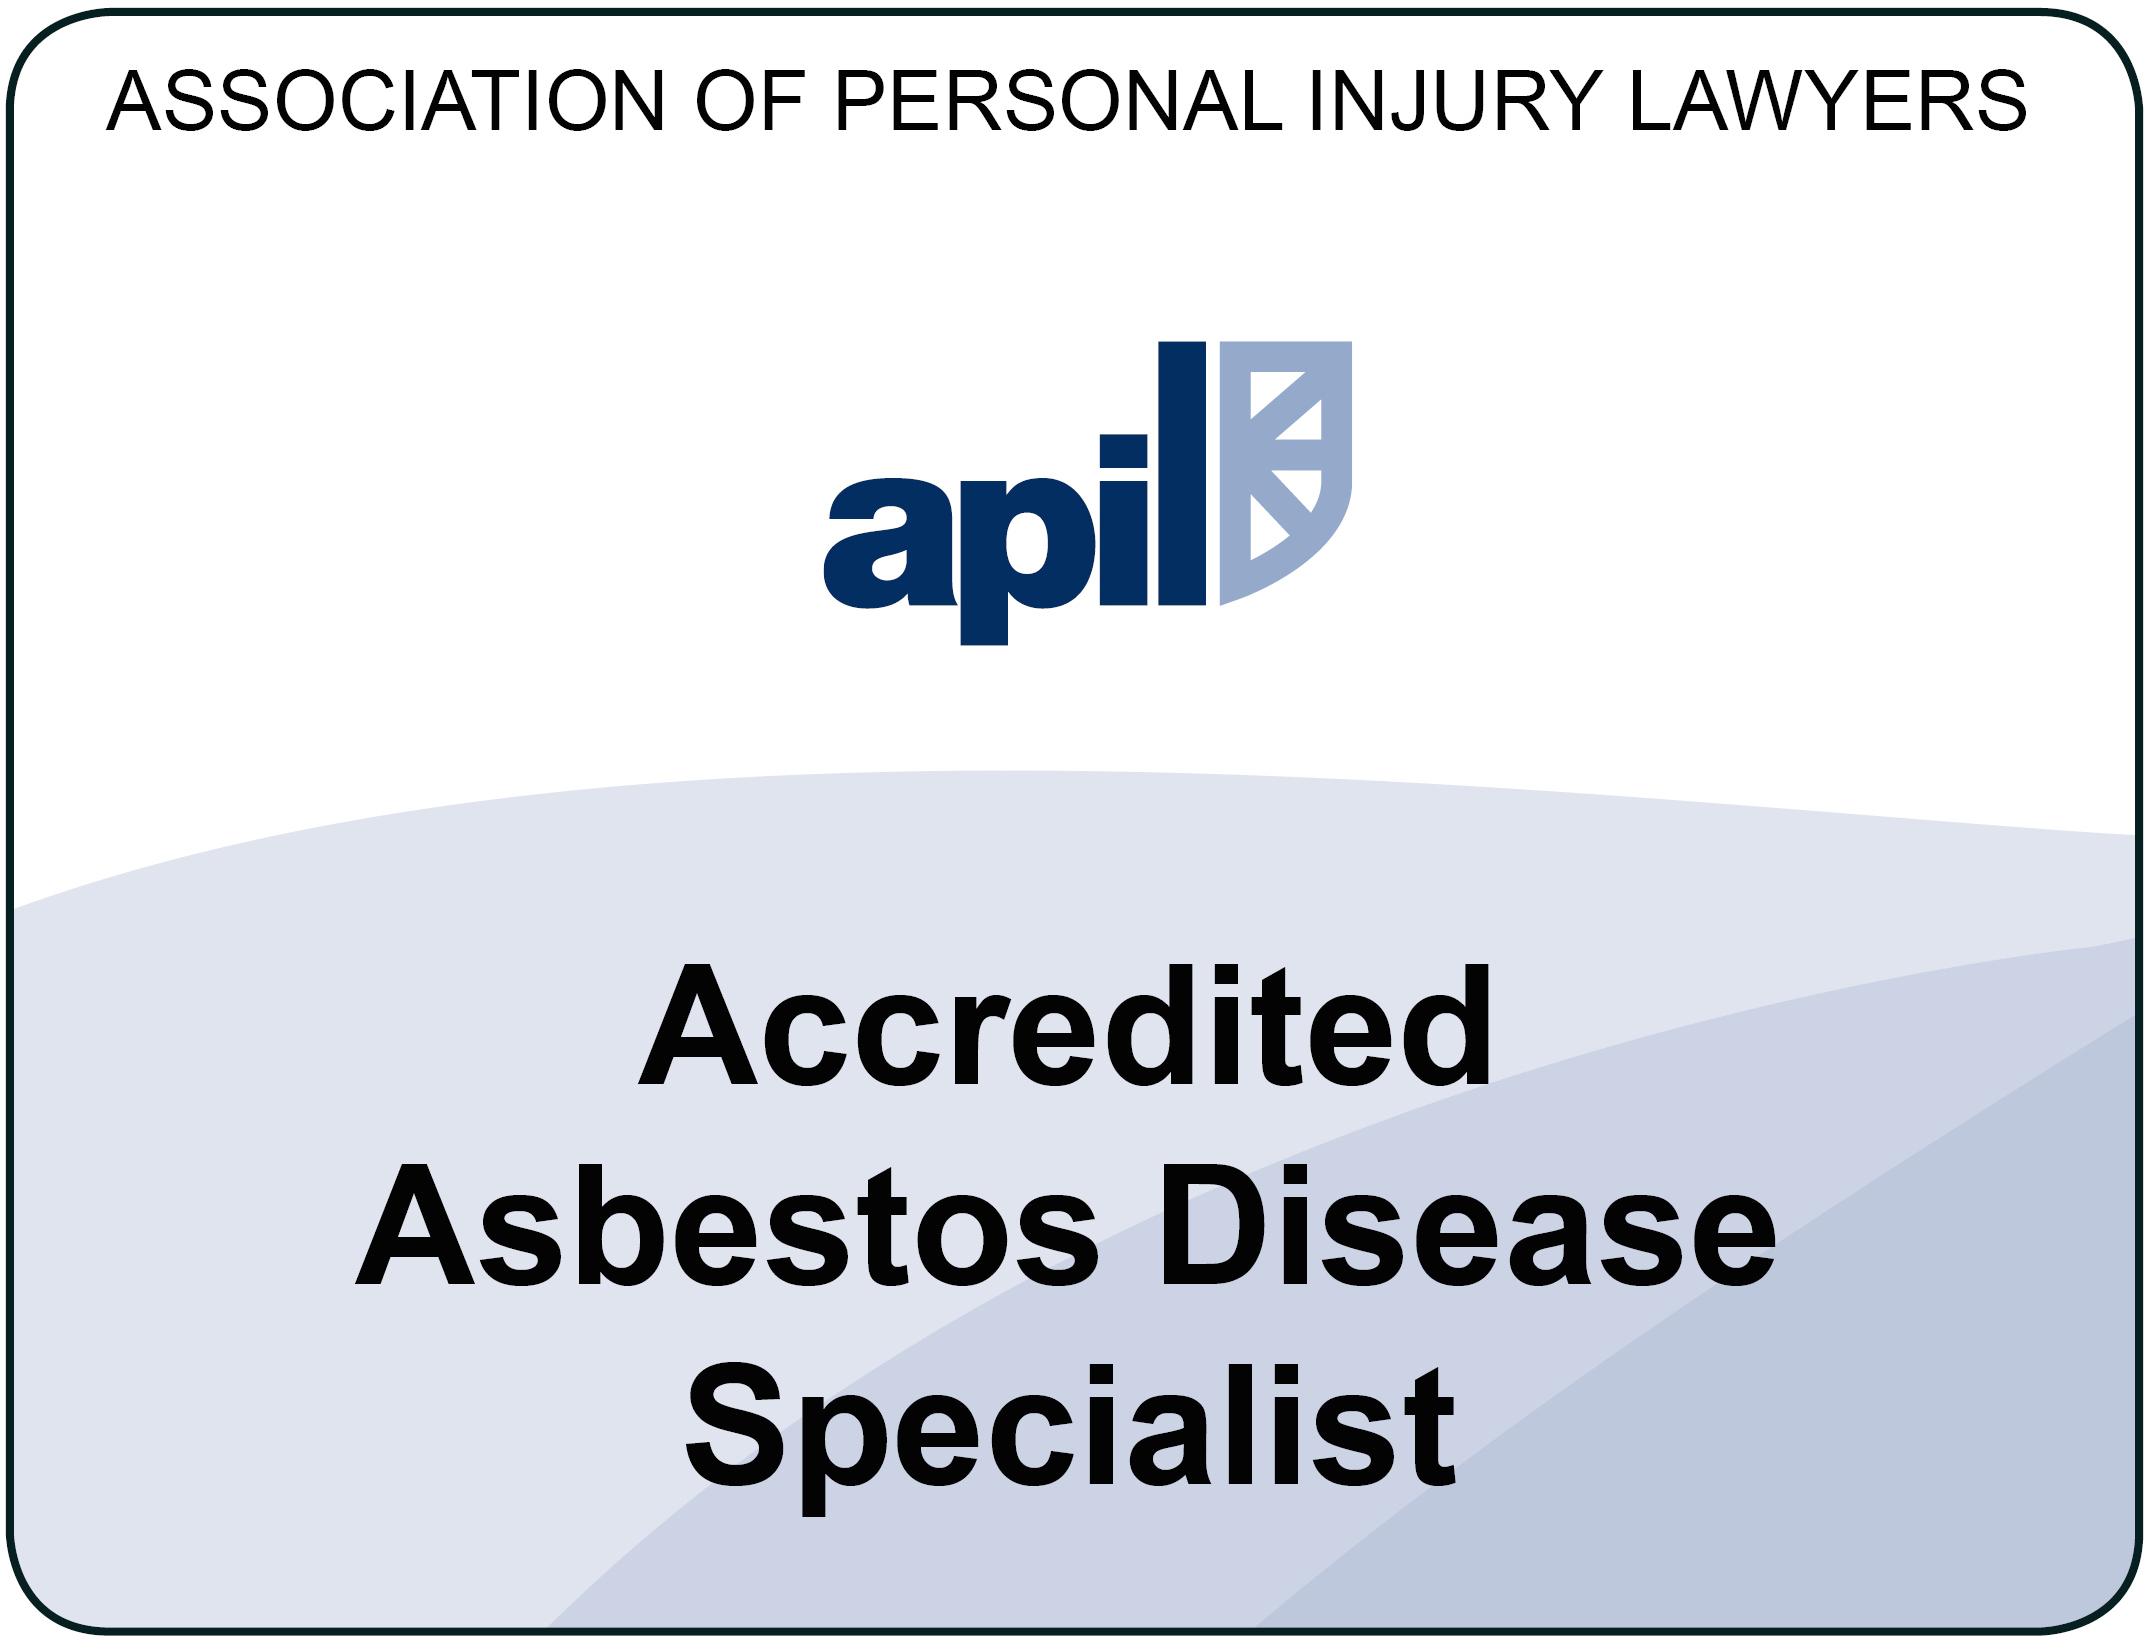 Paul Glanville is an Accredited Asbestos Disease Specialist - Association of Personal Injury Lawyers